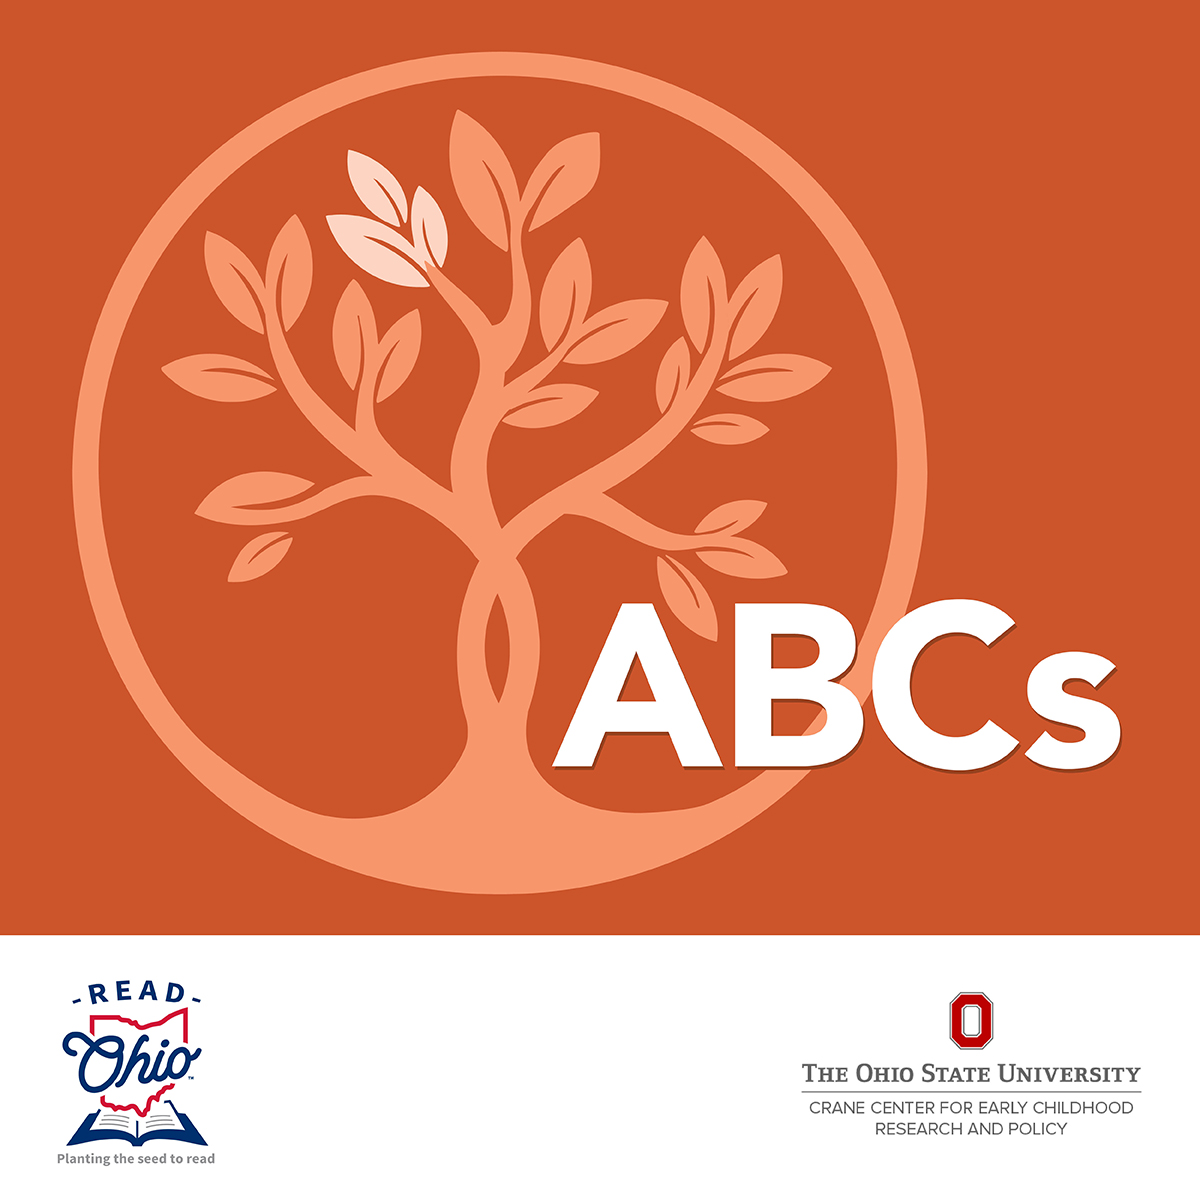 Read Together, Grow Together tree logo in one color (orange) with the word "ABCs" on top.